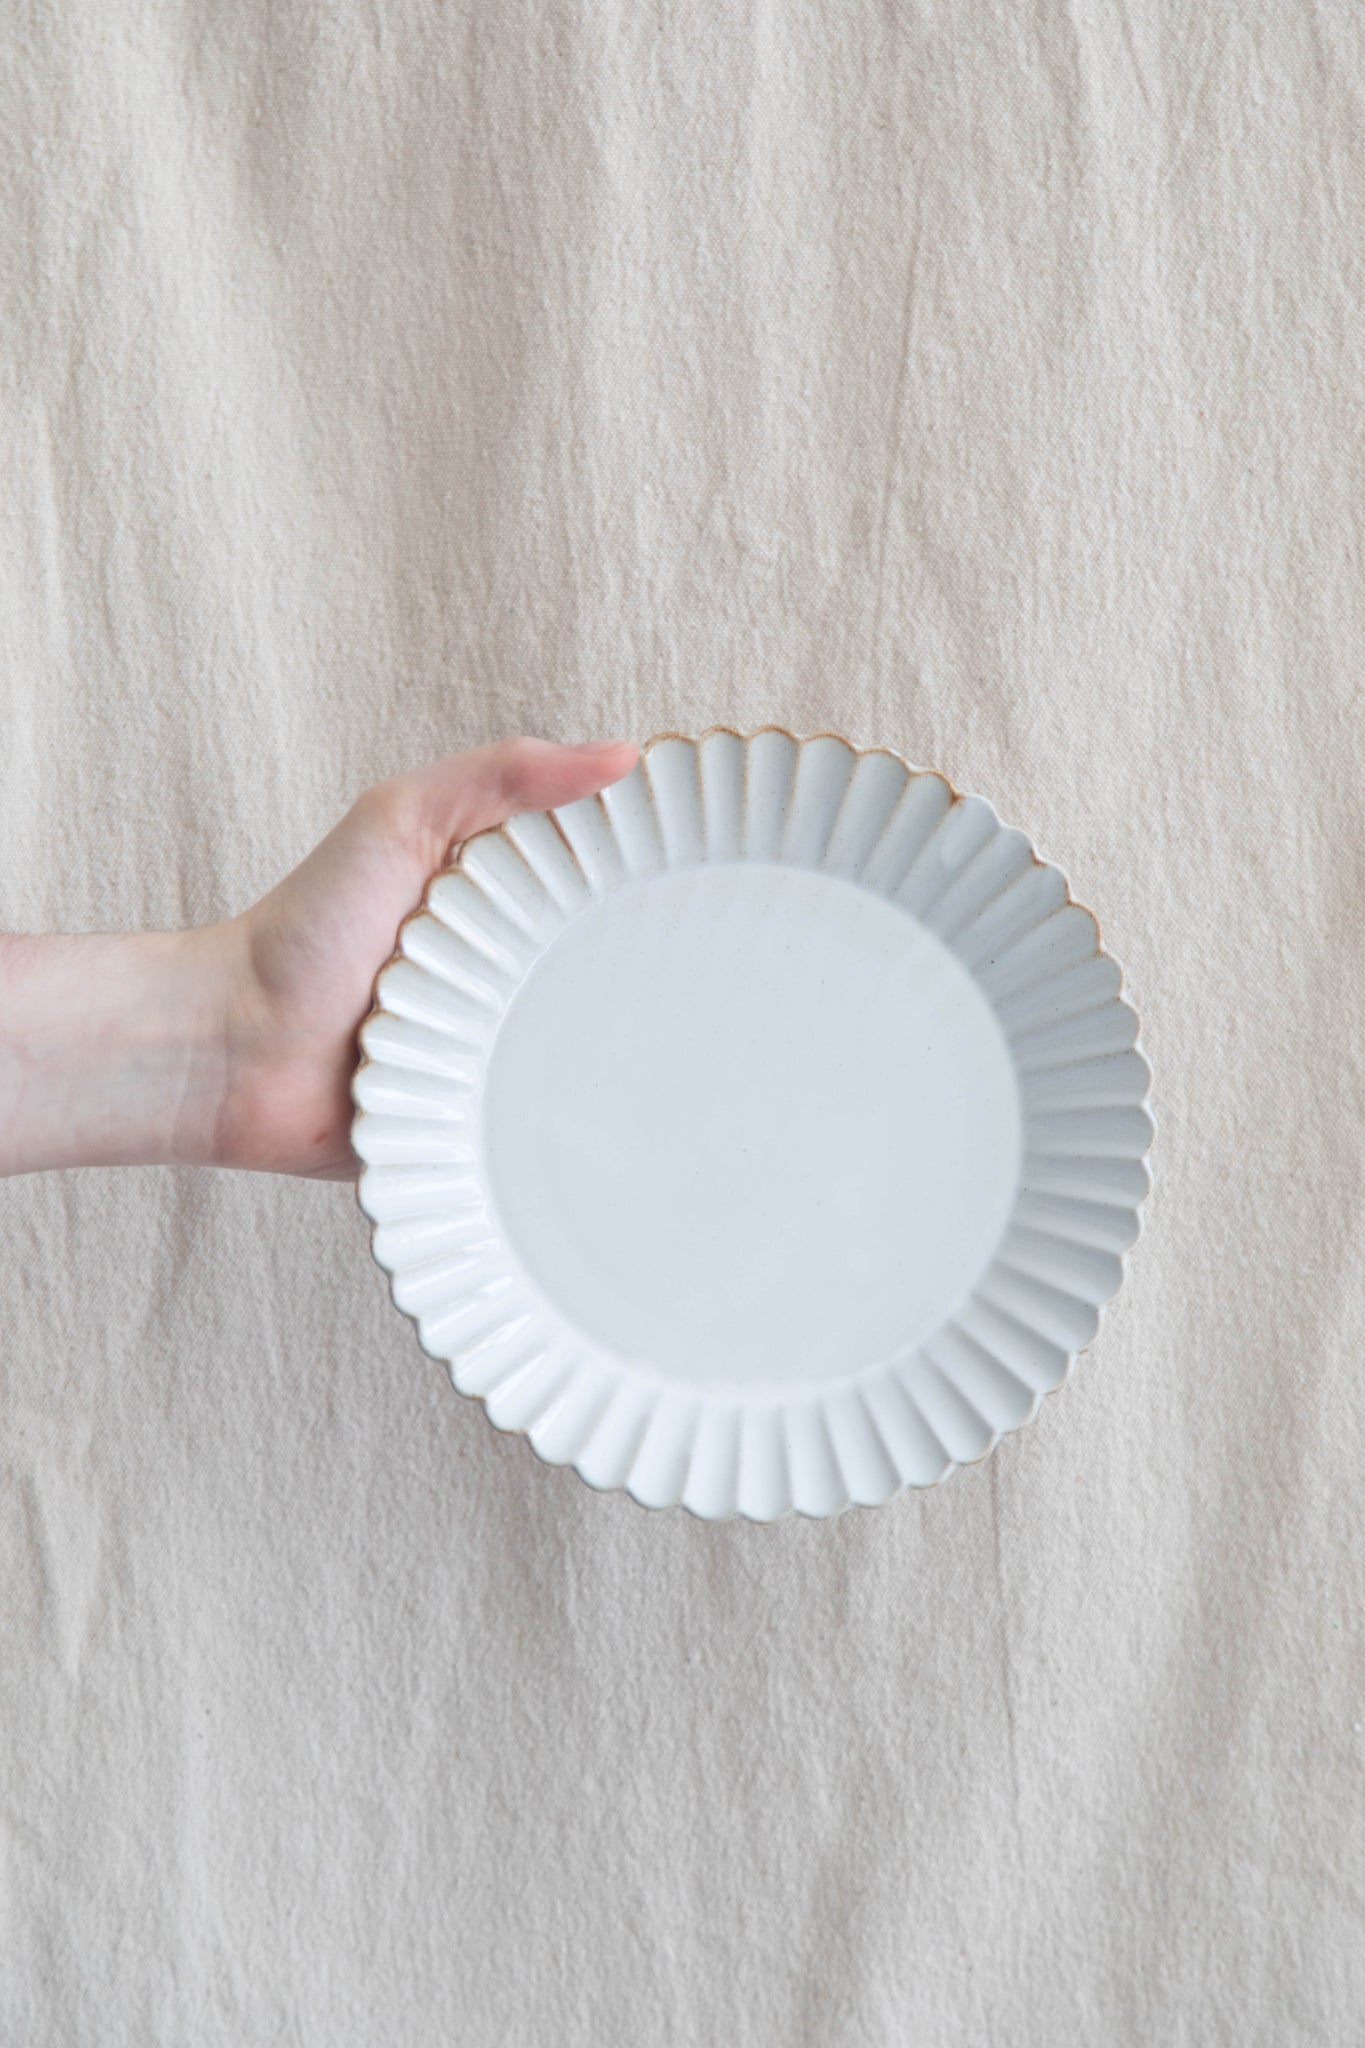 Barbarie Plates | Multiple Sizes & Colors